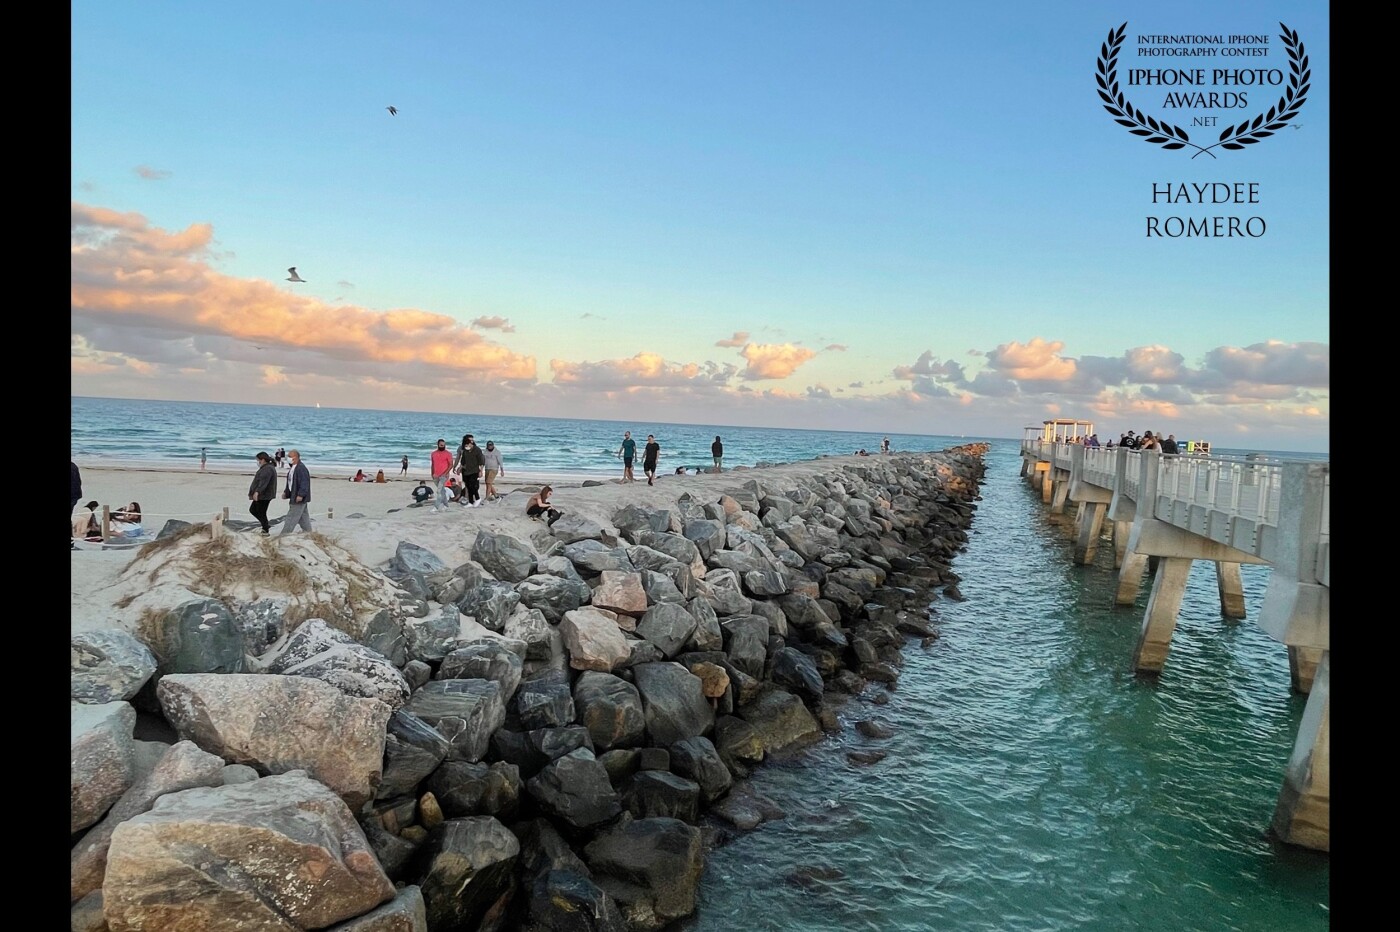 People walk out on the pier and adjacent tidal barrier at South Pointe Park in Miami Beach as the setting sun casts evening colors on a line of clouds.